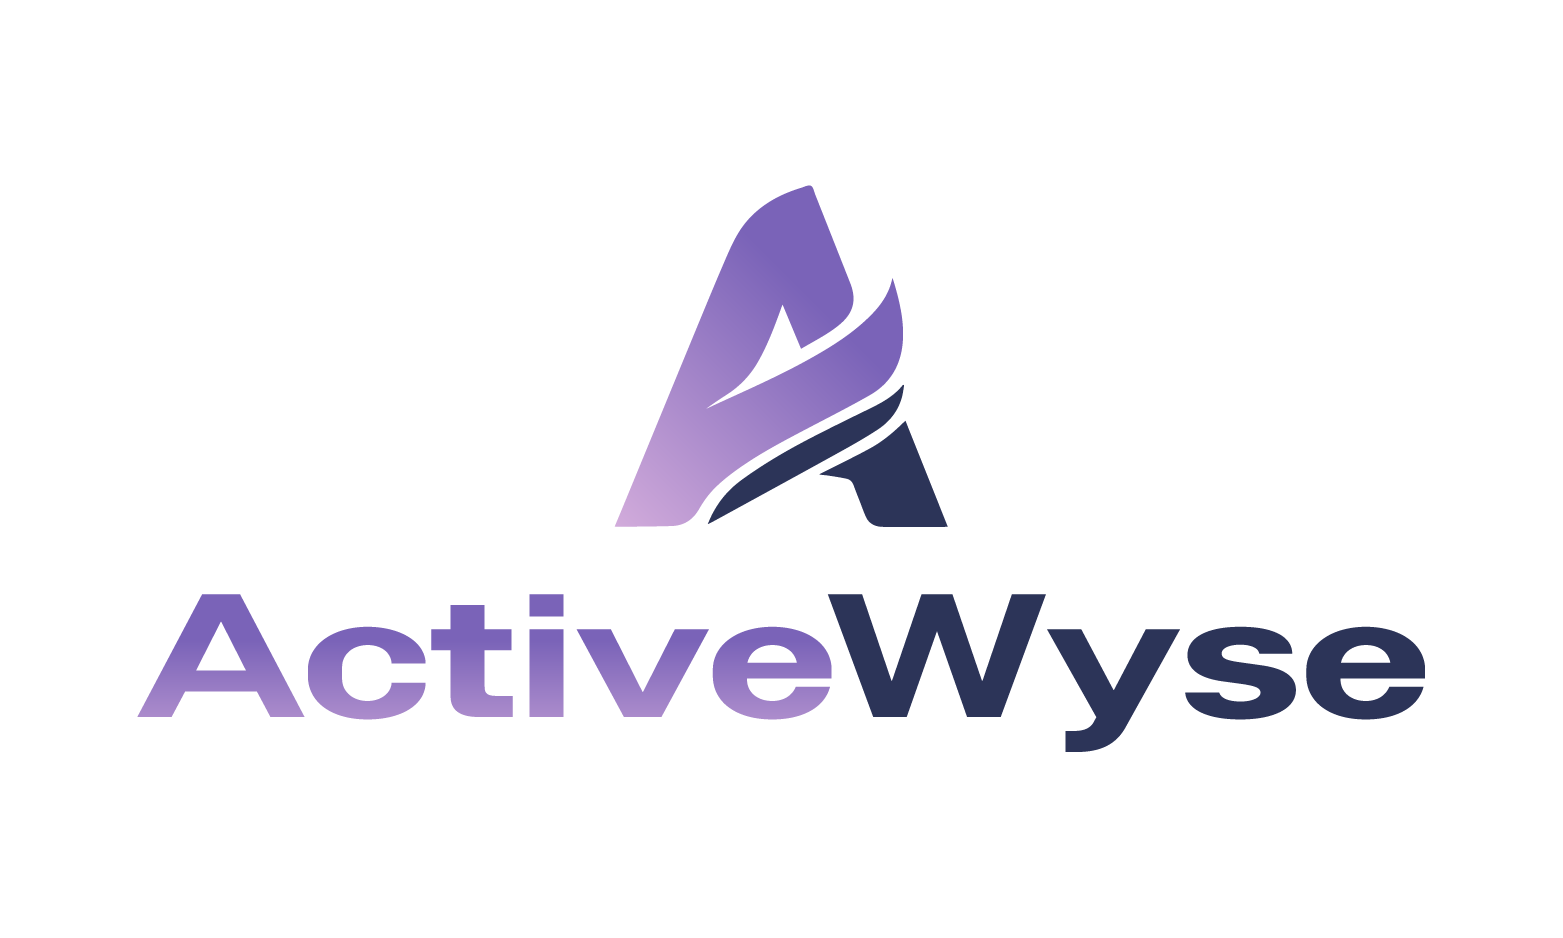 ActiveWyse.com - Creative brandable domain for sale